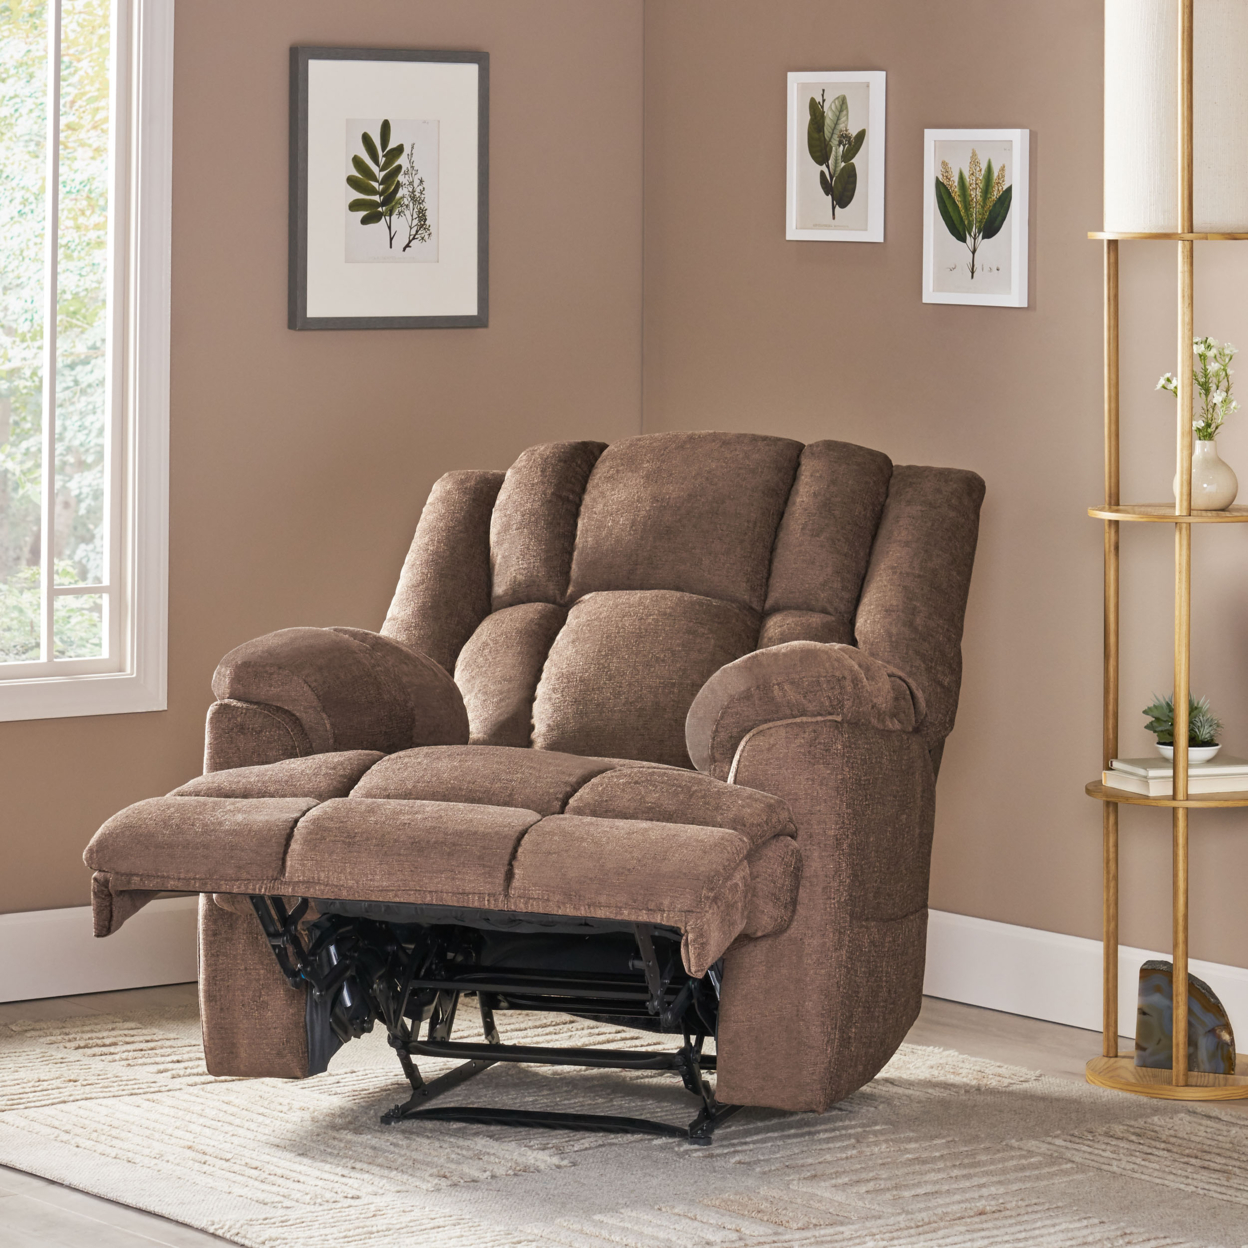 Siloam Contemporary Pillow Tufted Massage Recliner - Black/brown